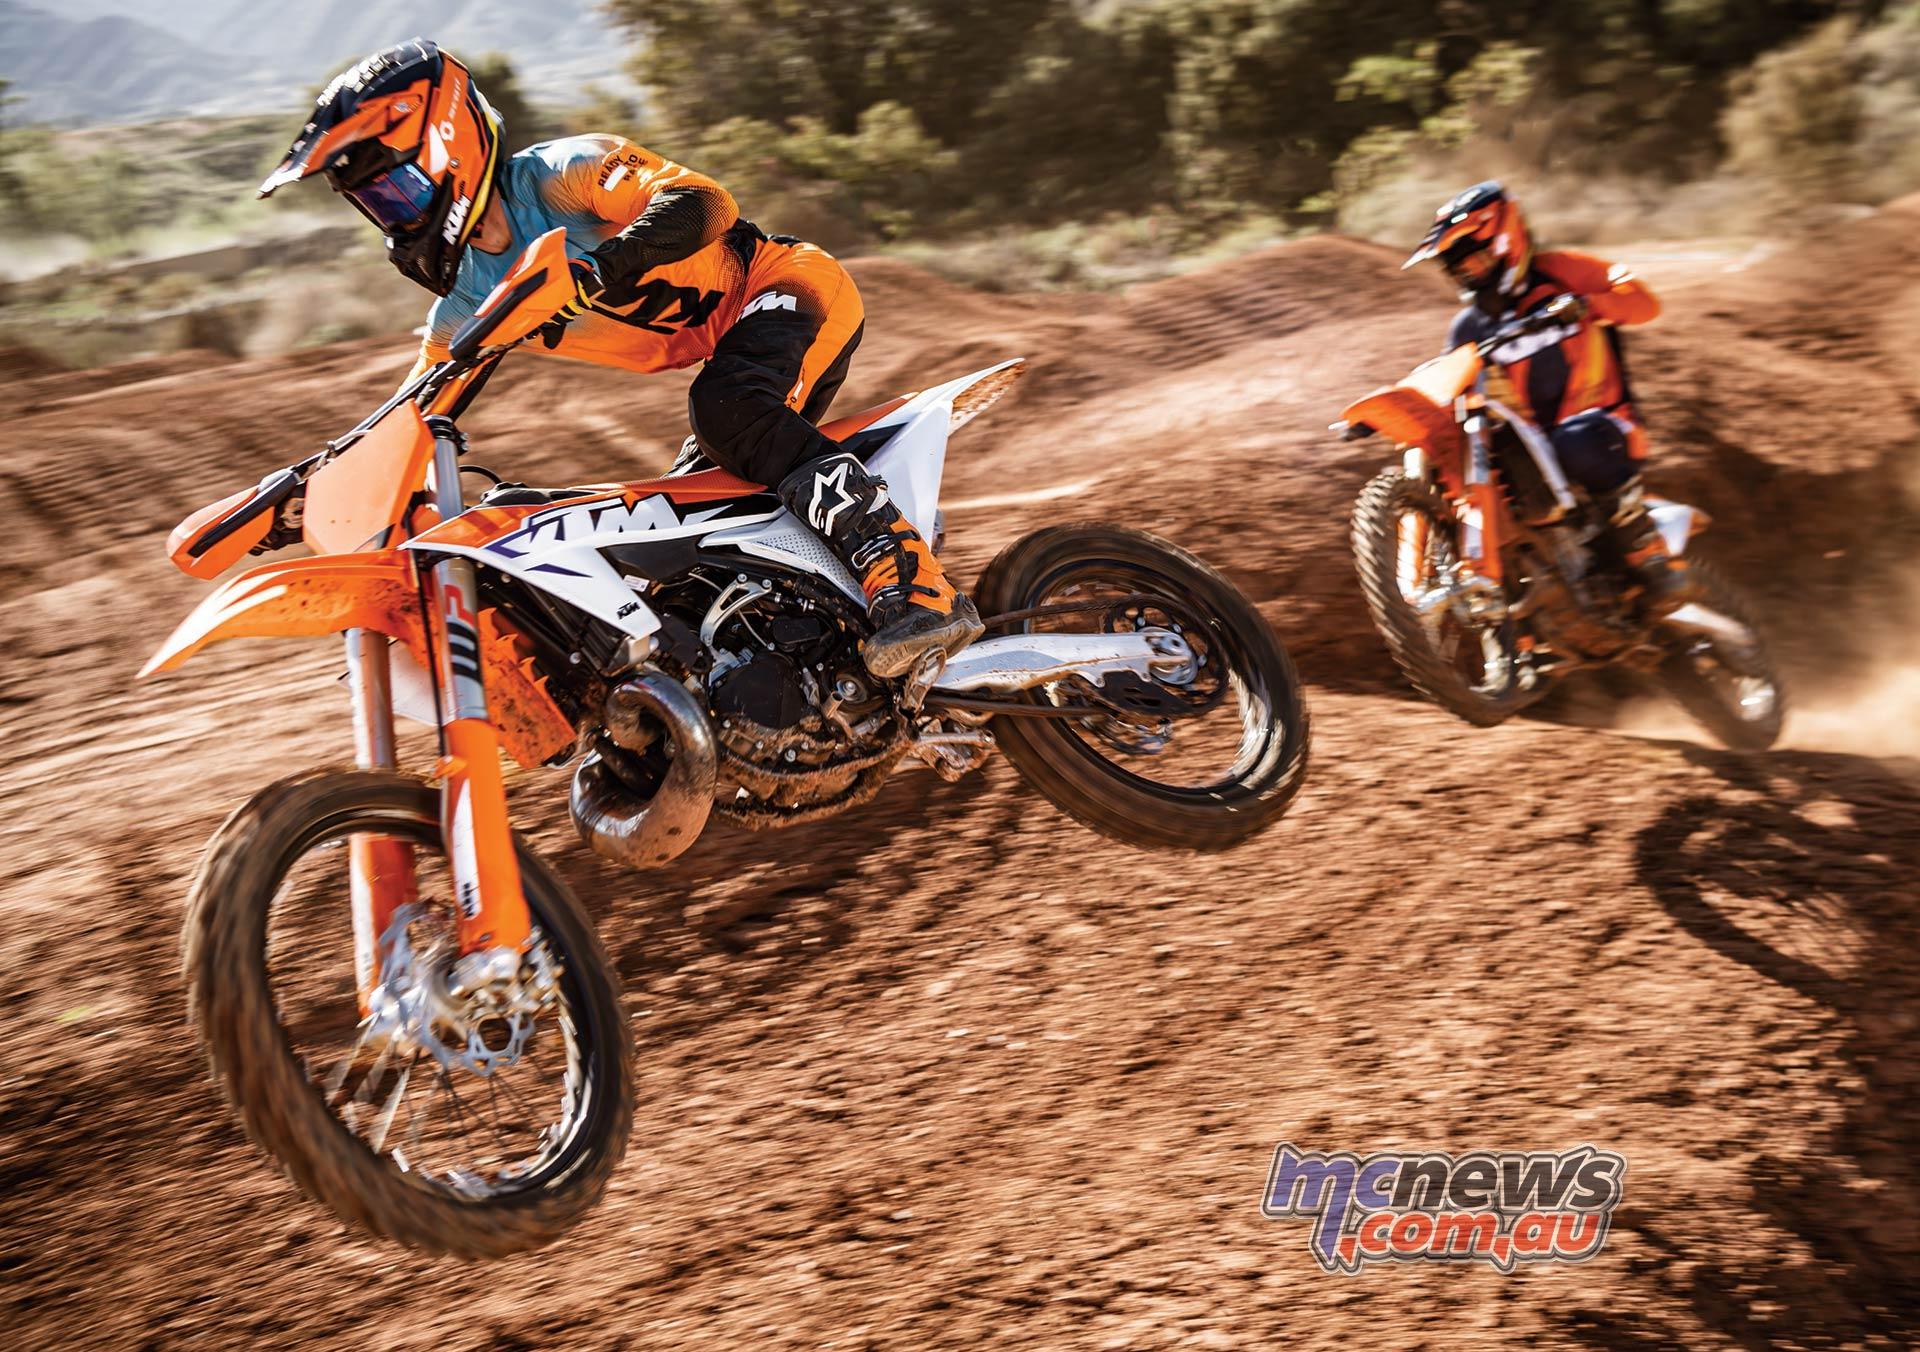 Ktm Inject The Two Stroke Motocrossers For Mcnews